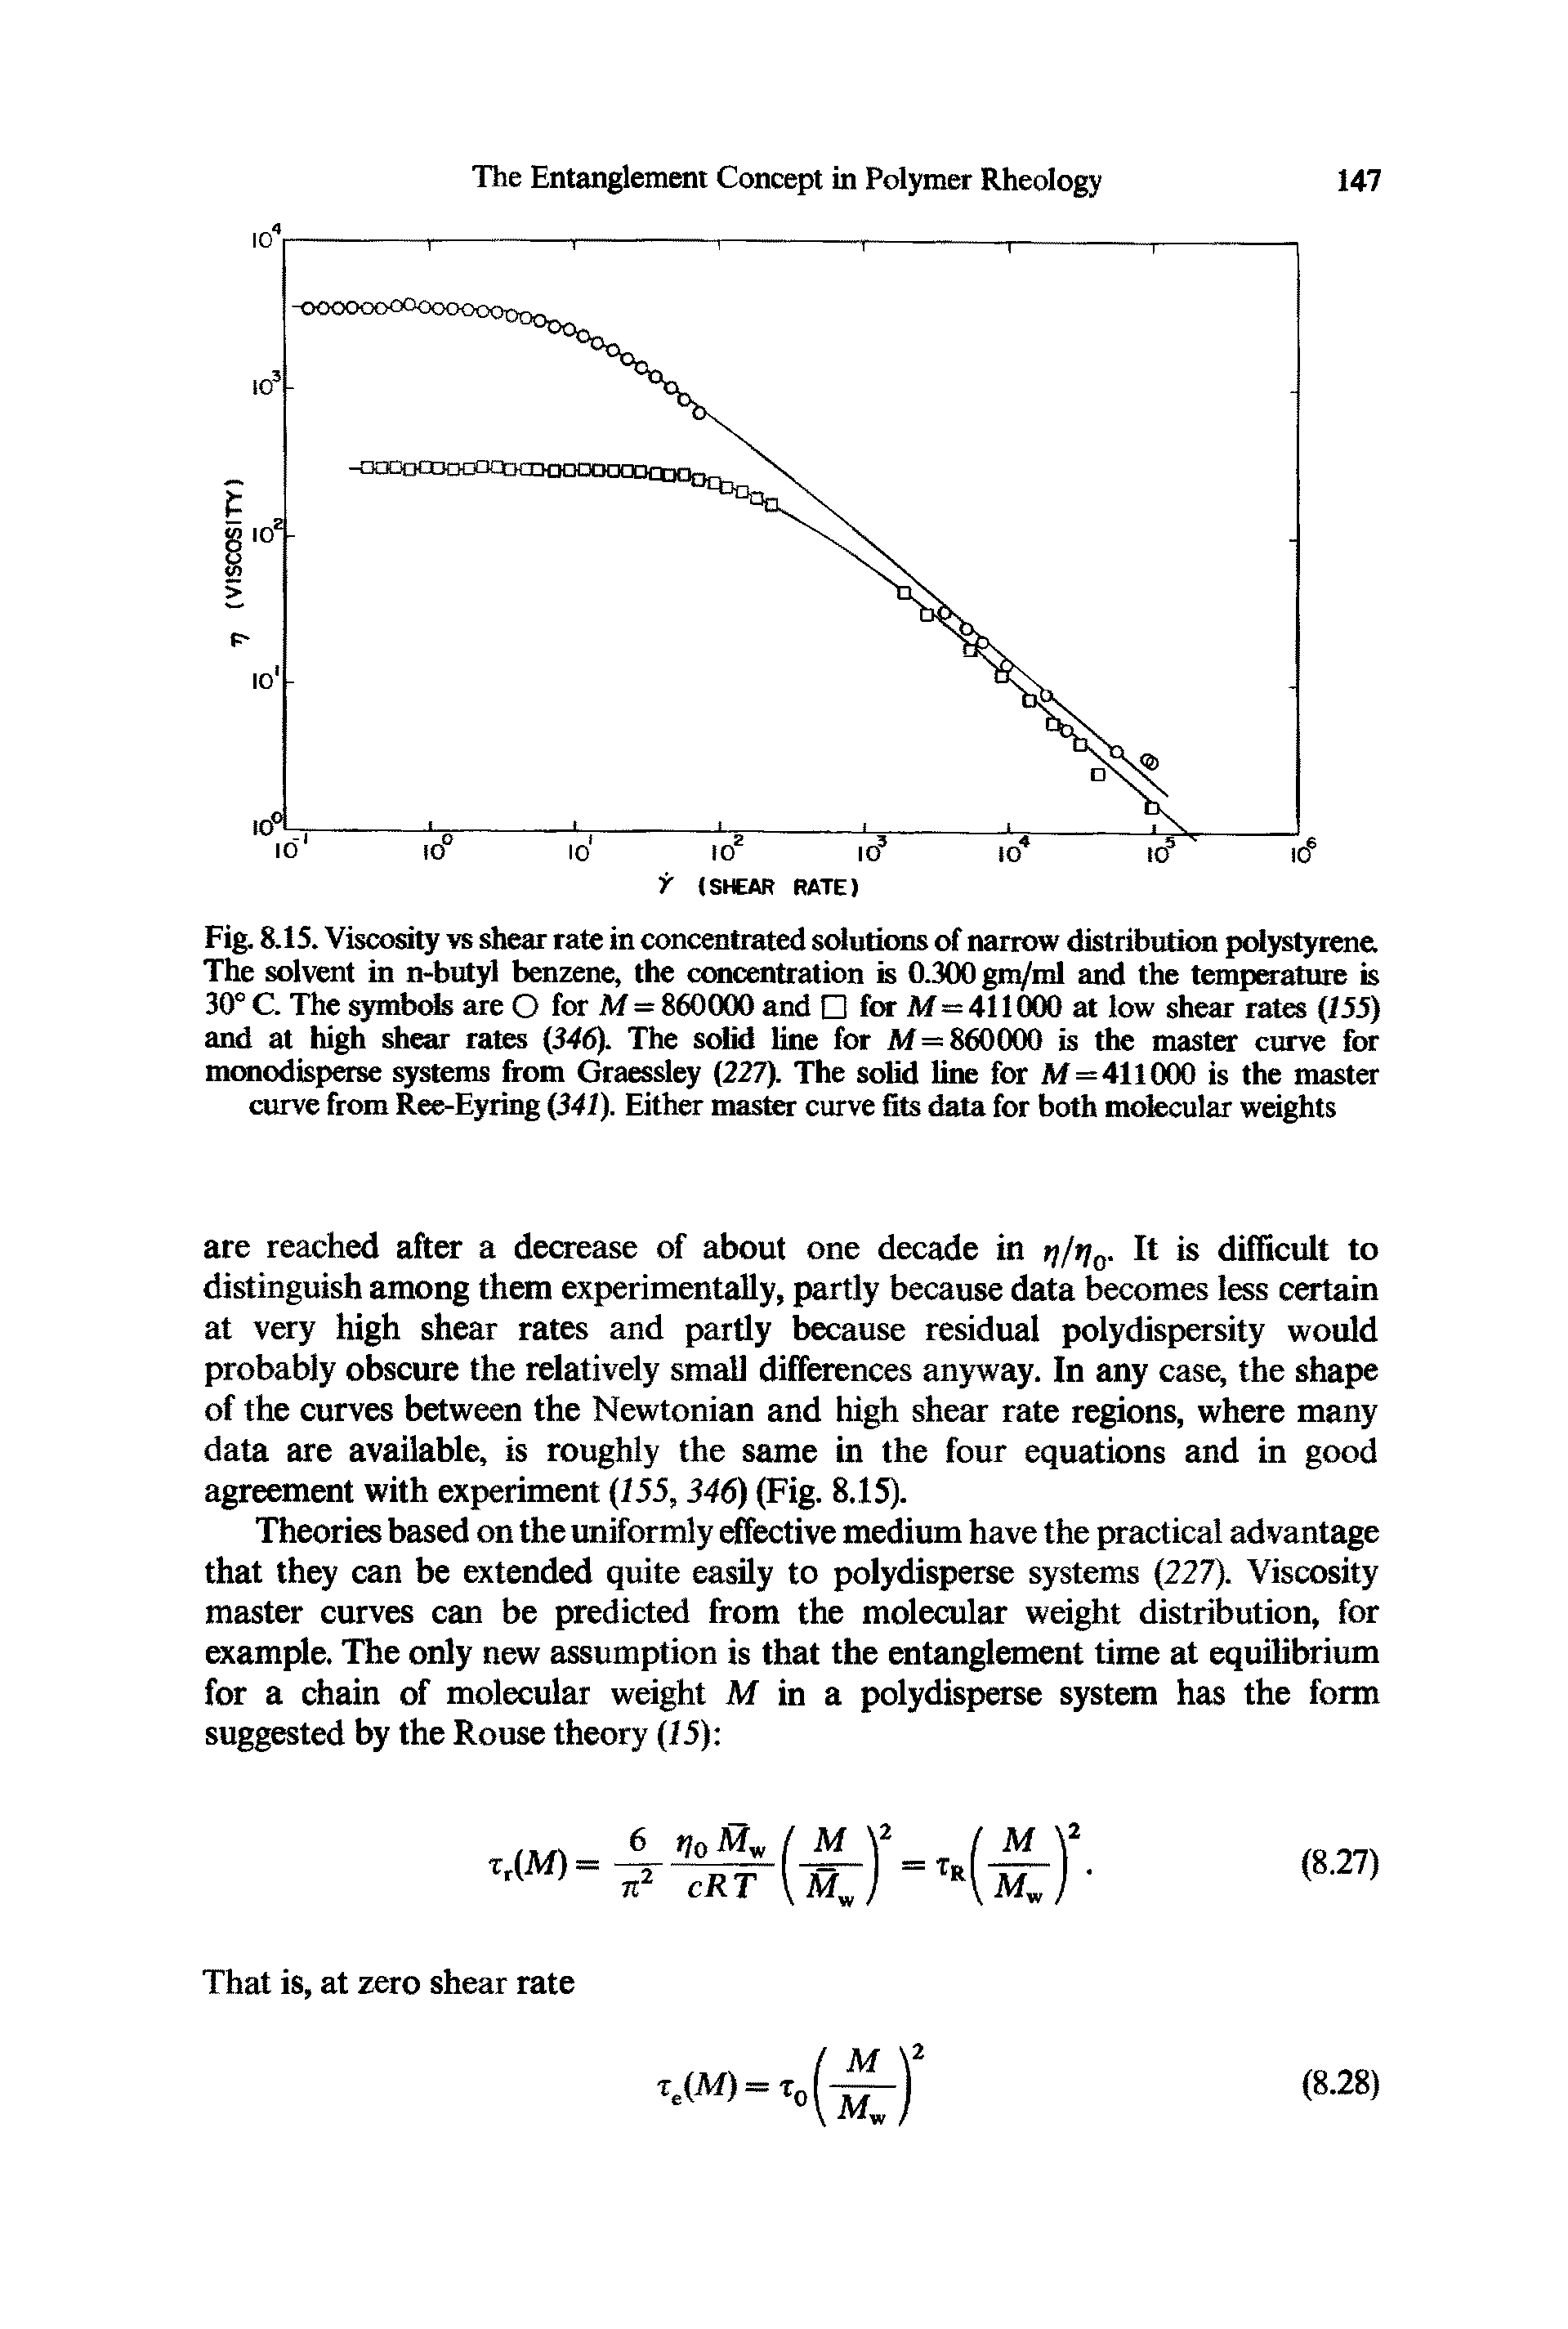 Fig. 8.15. Viscosity vs shear rate in concentrated solutions of narrow distribution polystyrene The solvent in n-butyl benzene, the concentration is 0.300 gm/ml and the temperature is 30° C. The symbols are O for M = 860000 and for M = 411000 at low shear rates (155) and at high shear rates (346). The solid line for M= 860000 is the master curve for monodisperse systems from Graessley (227). The solid line for M=411000 is the master curve from Ree-Eyring (341). Either master curve fits data for both molecular weights...